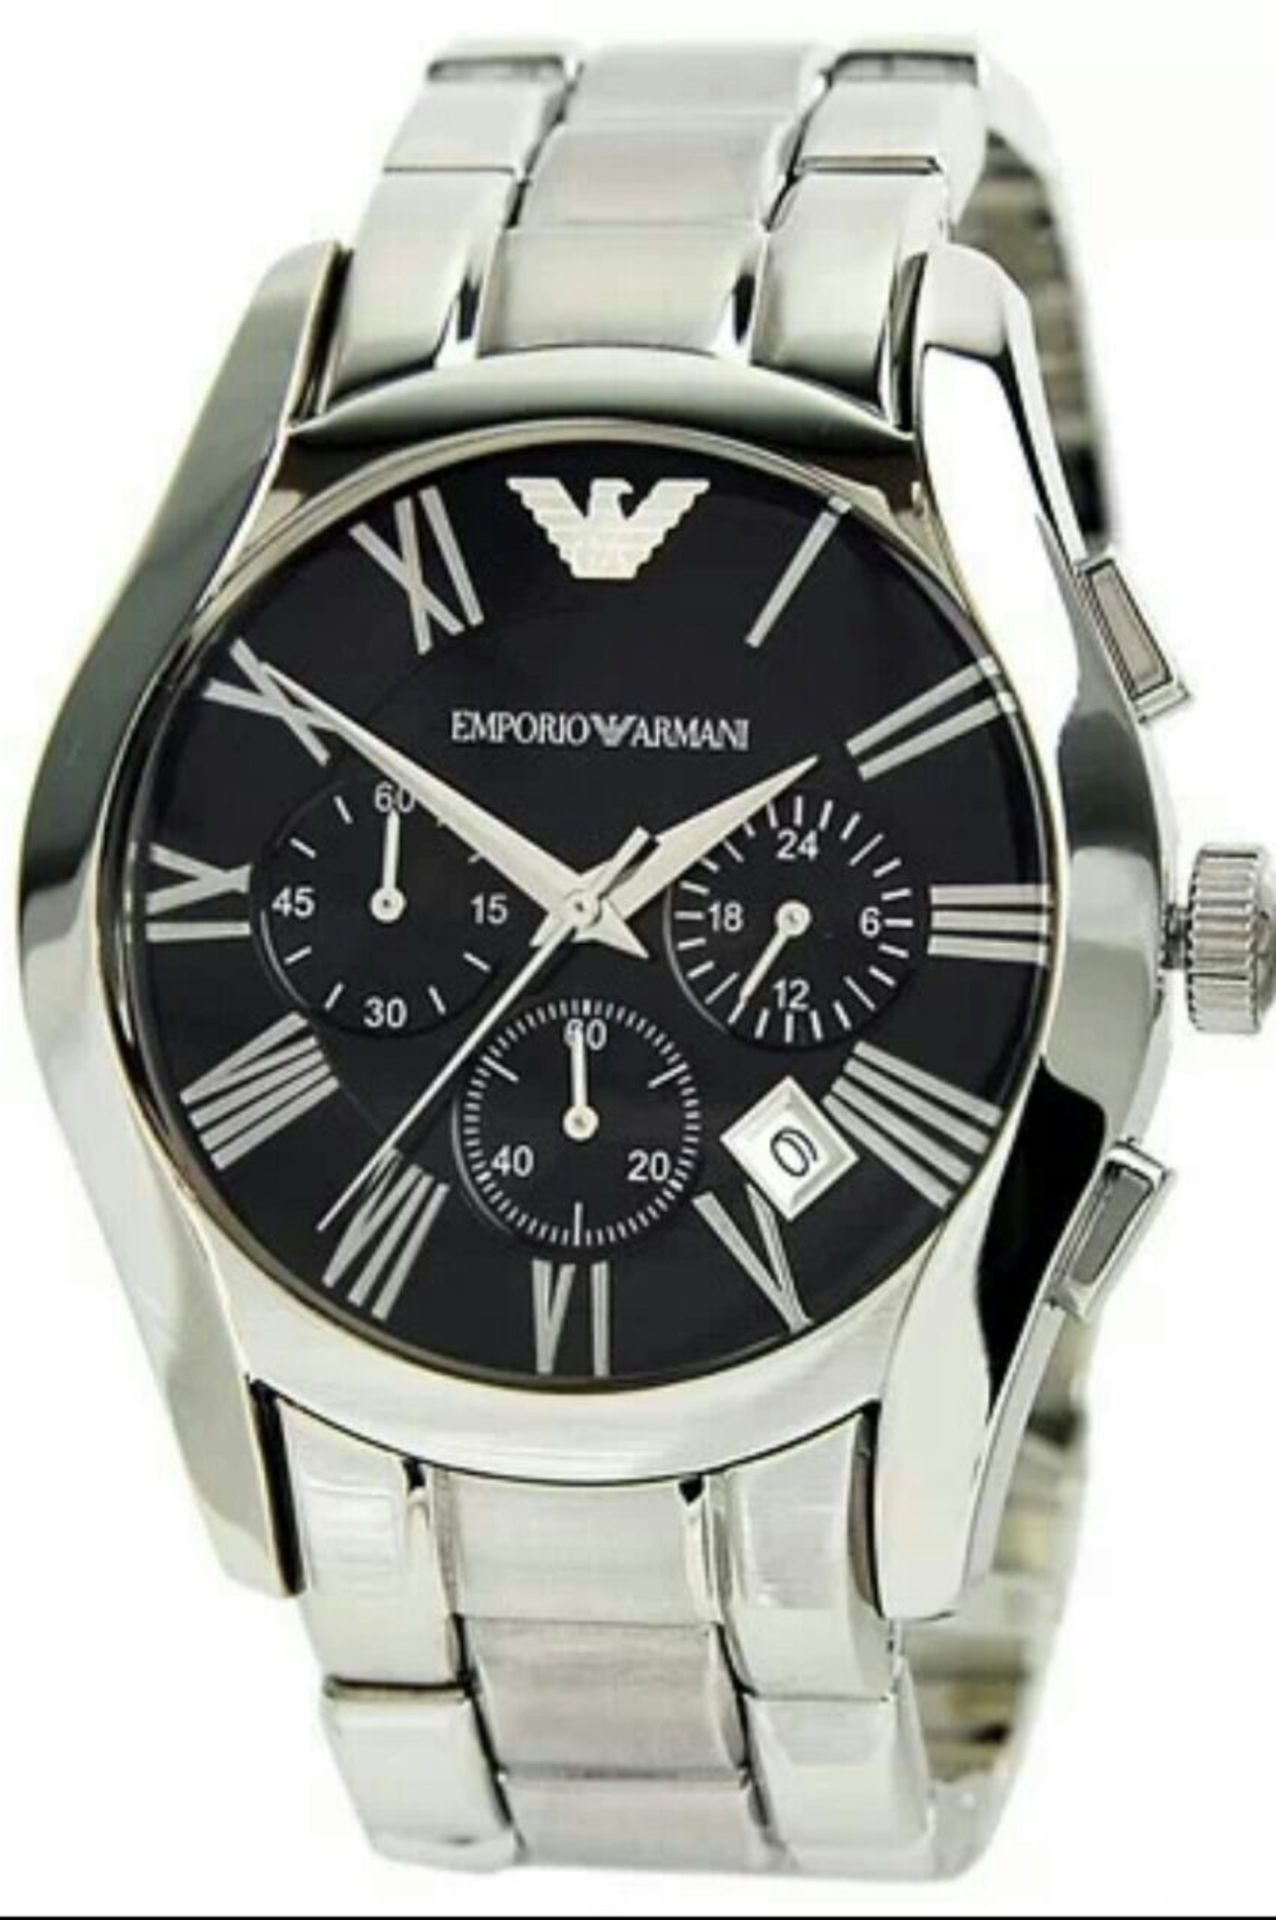 BRAND NEW GENTS EMPORIO ARMANI AR0673, SILVER BRACELET WATCH WITH ARMANI WATCH BOXES, MANUAL